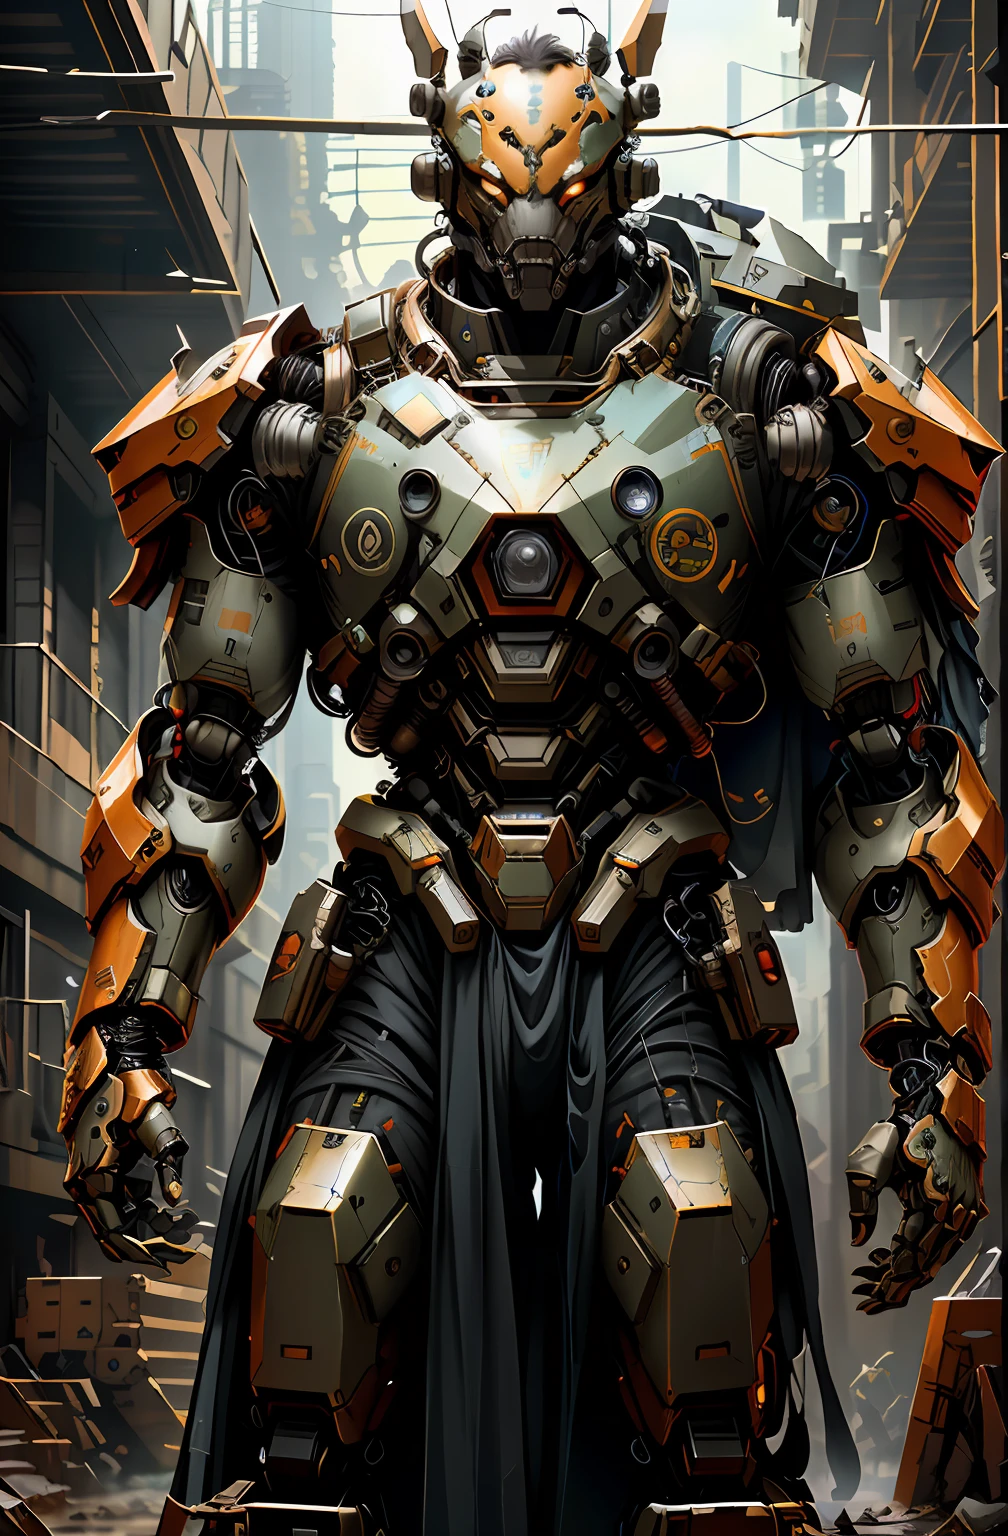 There is a robot standing in the building, epic scifi character art, epic sci-fi character art, ultra detailed game art, wojtek fus, High quality digital concept art, Alexander Ferra Mecha, detailed digital concept art, Mecha suit, bionic scifi alexandre ferra, painterly humanoid mecha, epic scifi character art，Chinese dragon elements